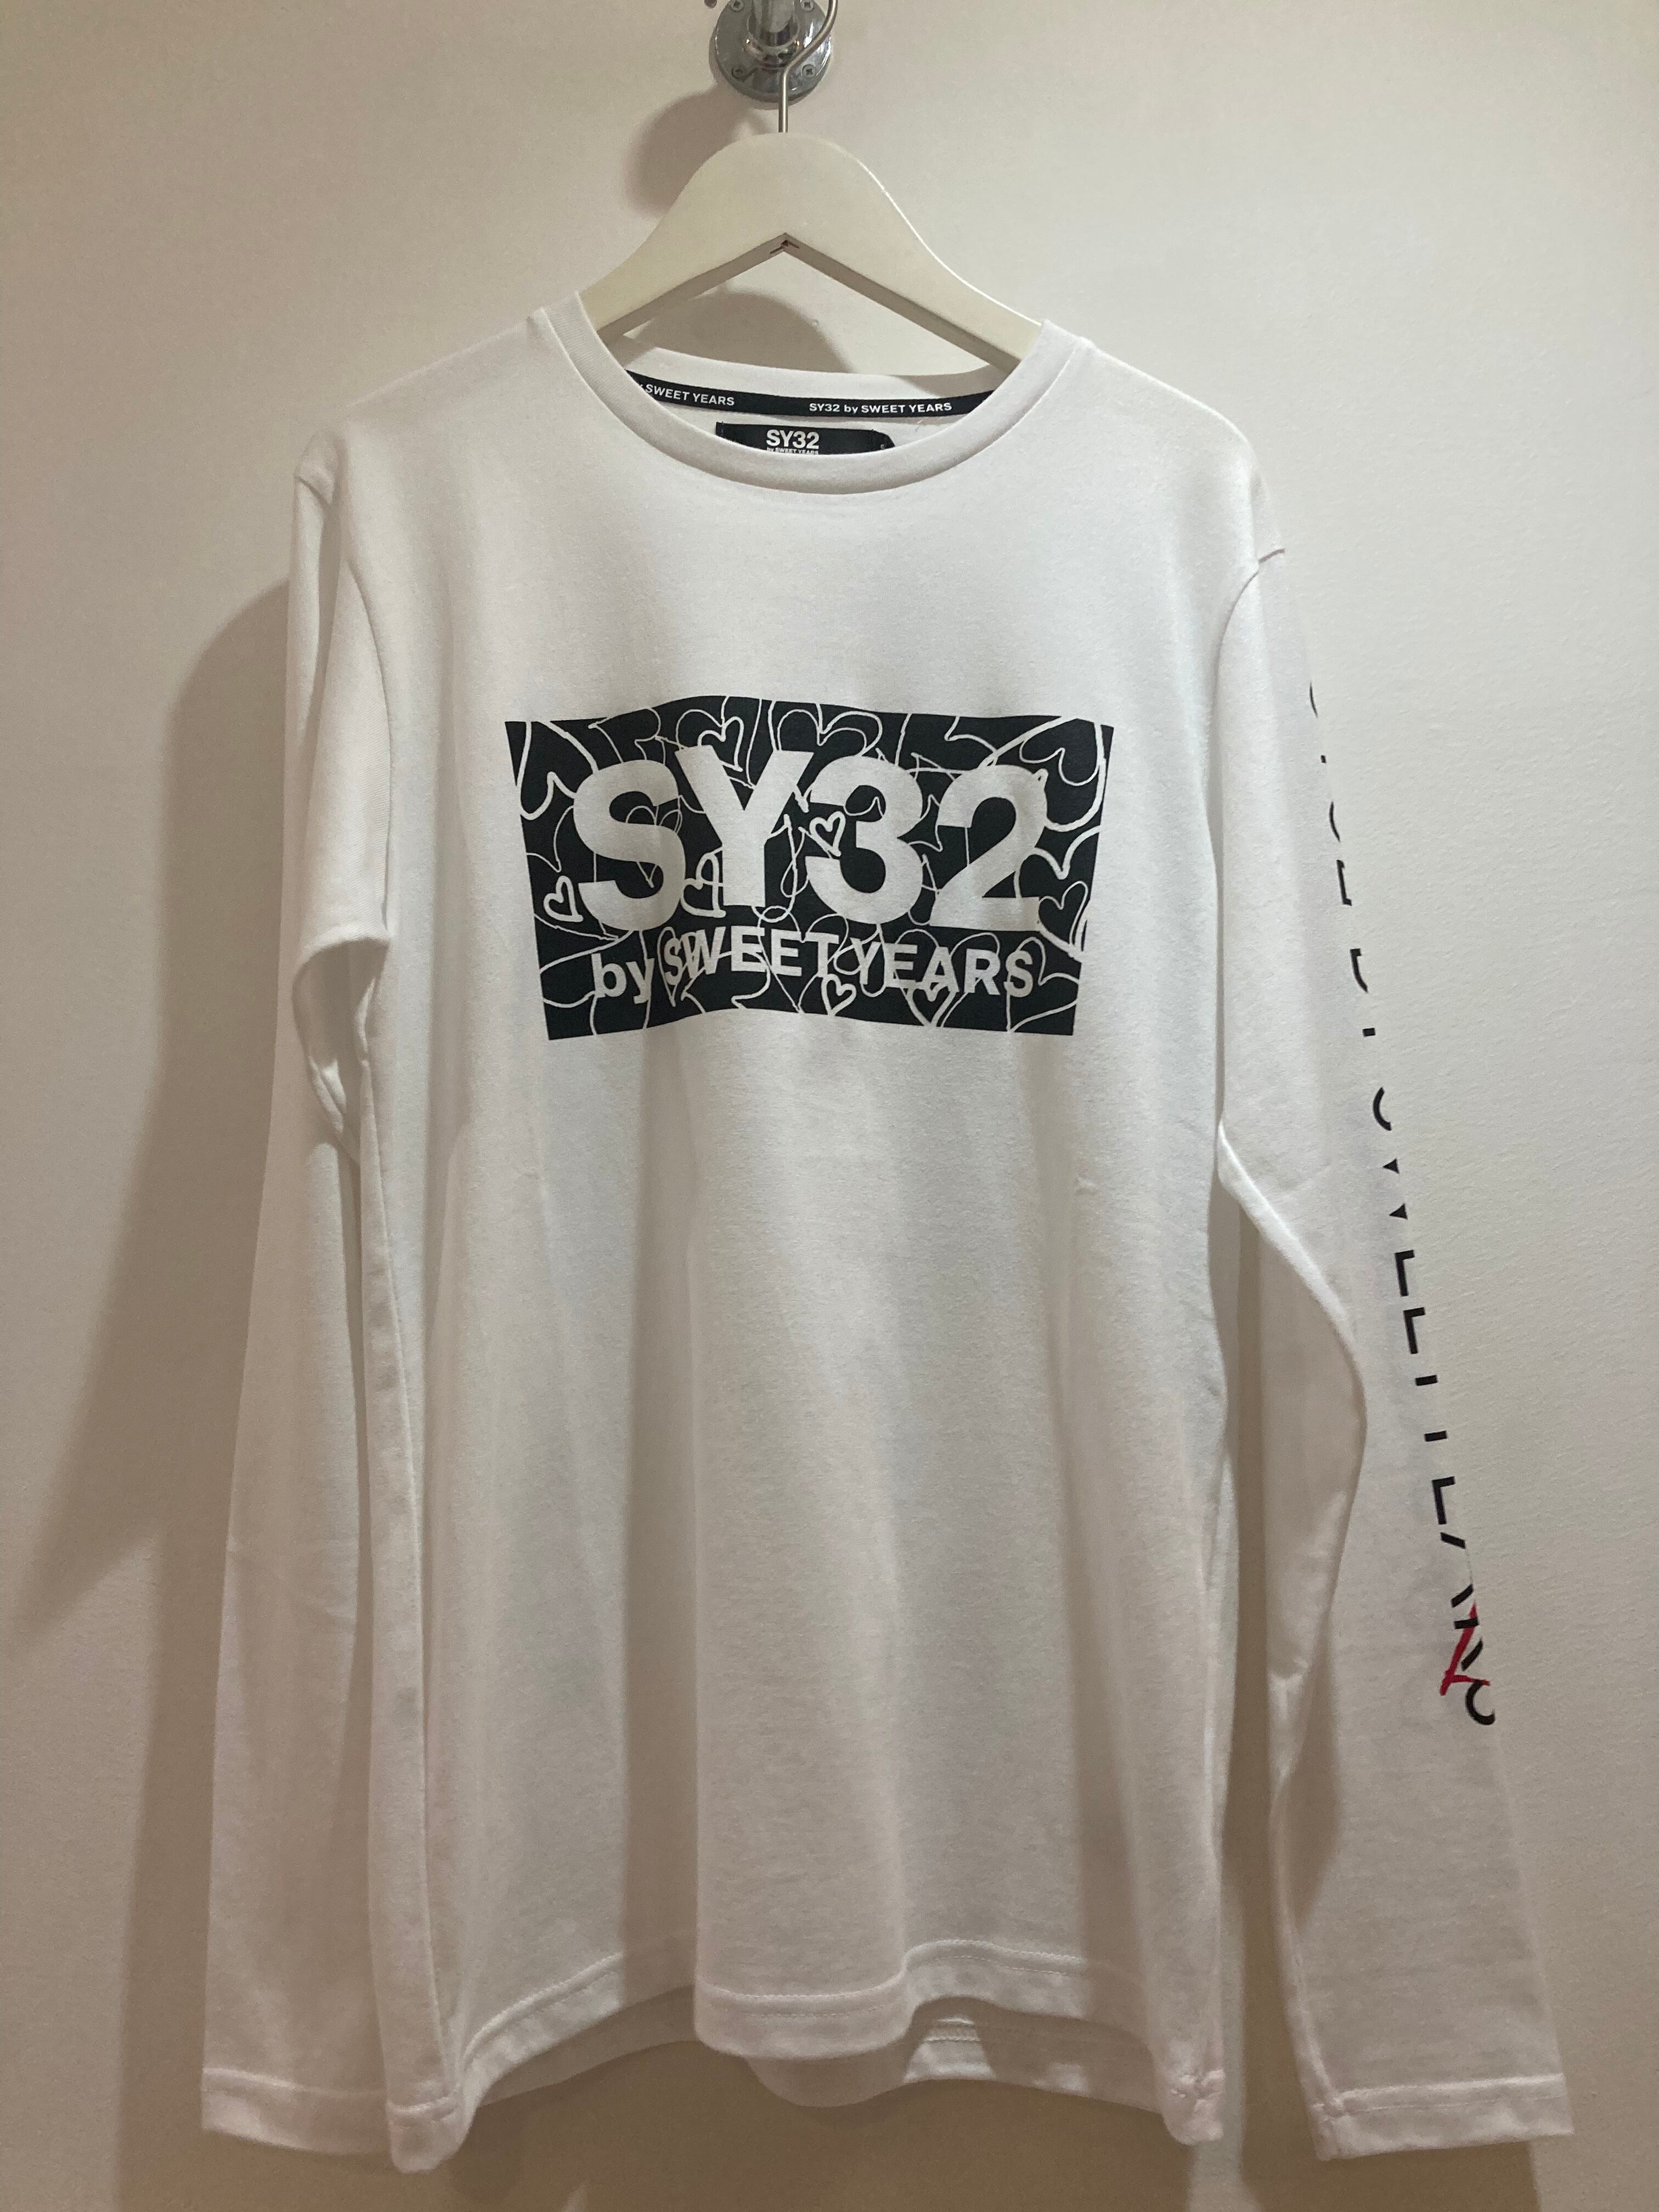 SY32 by SWWT YEARS /ロング Tシャツ ホワイト×ブラック文字 | ONE ...